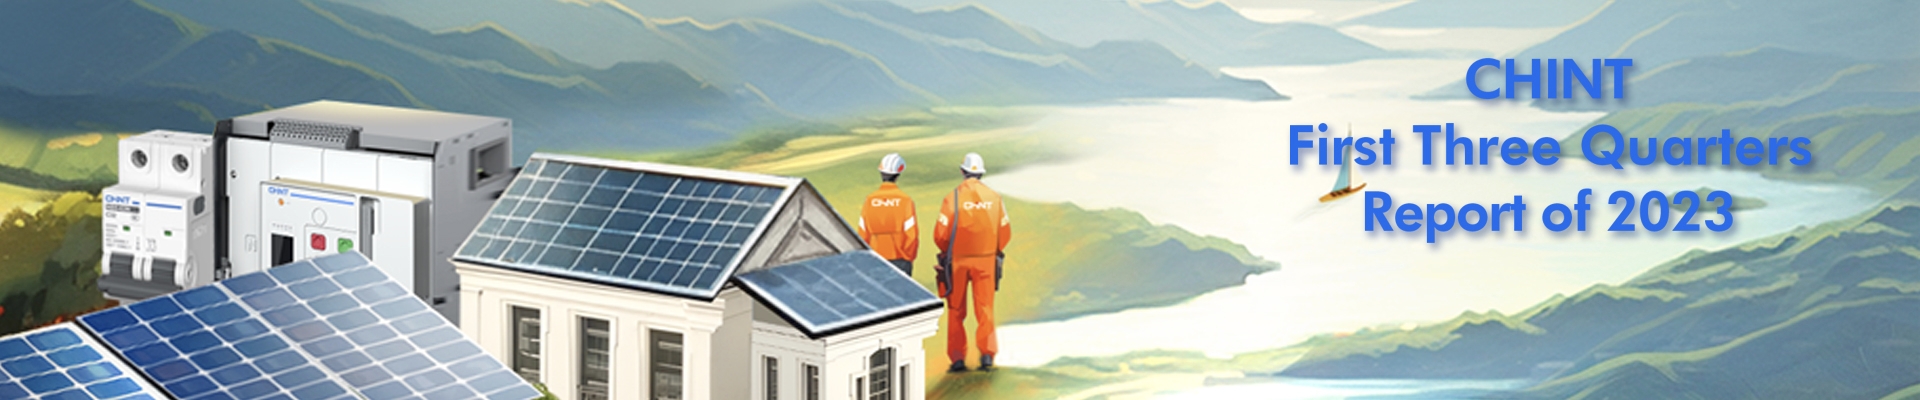 Smart Energy Solution Provider | CHINT